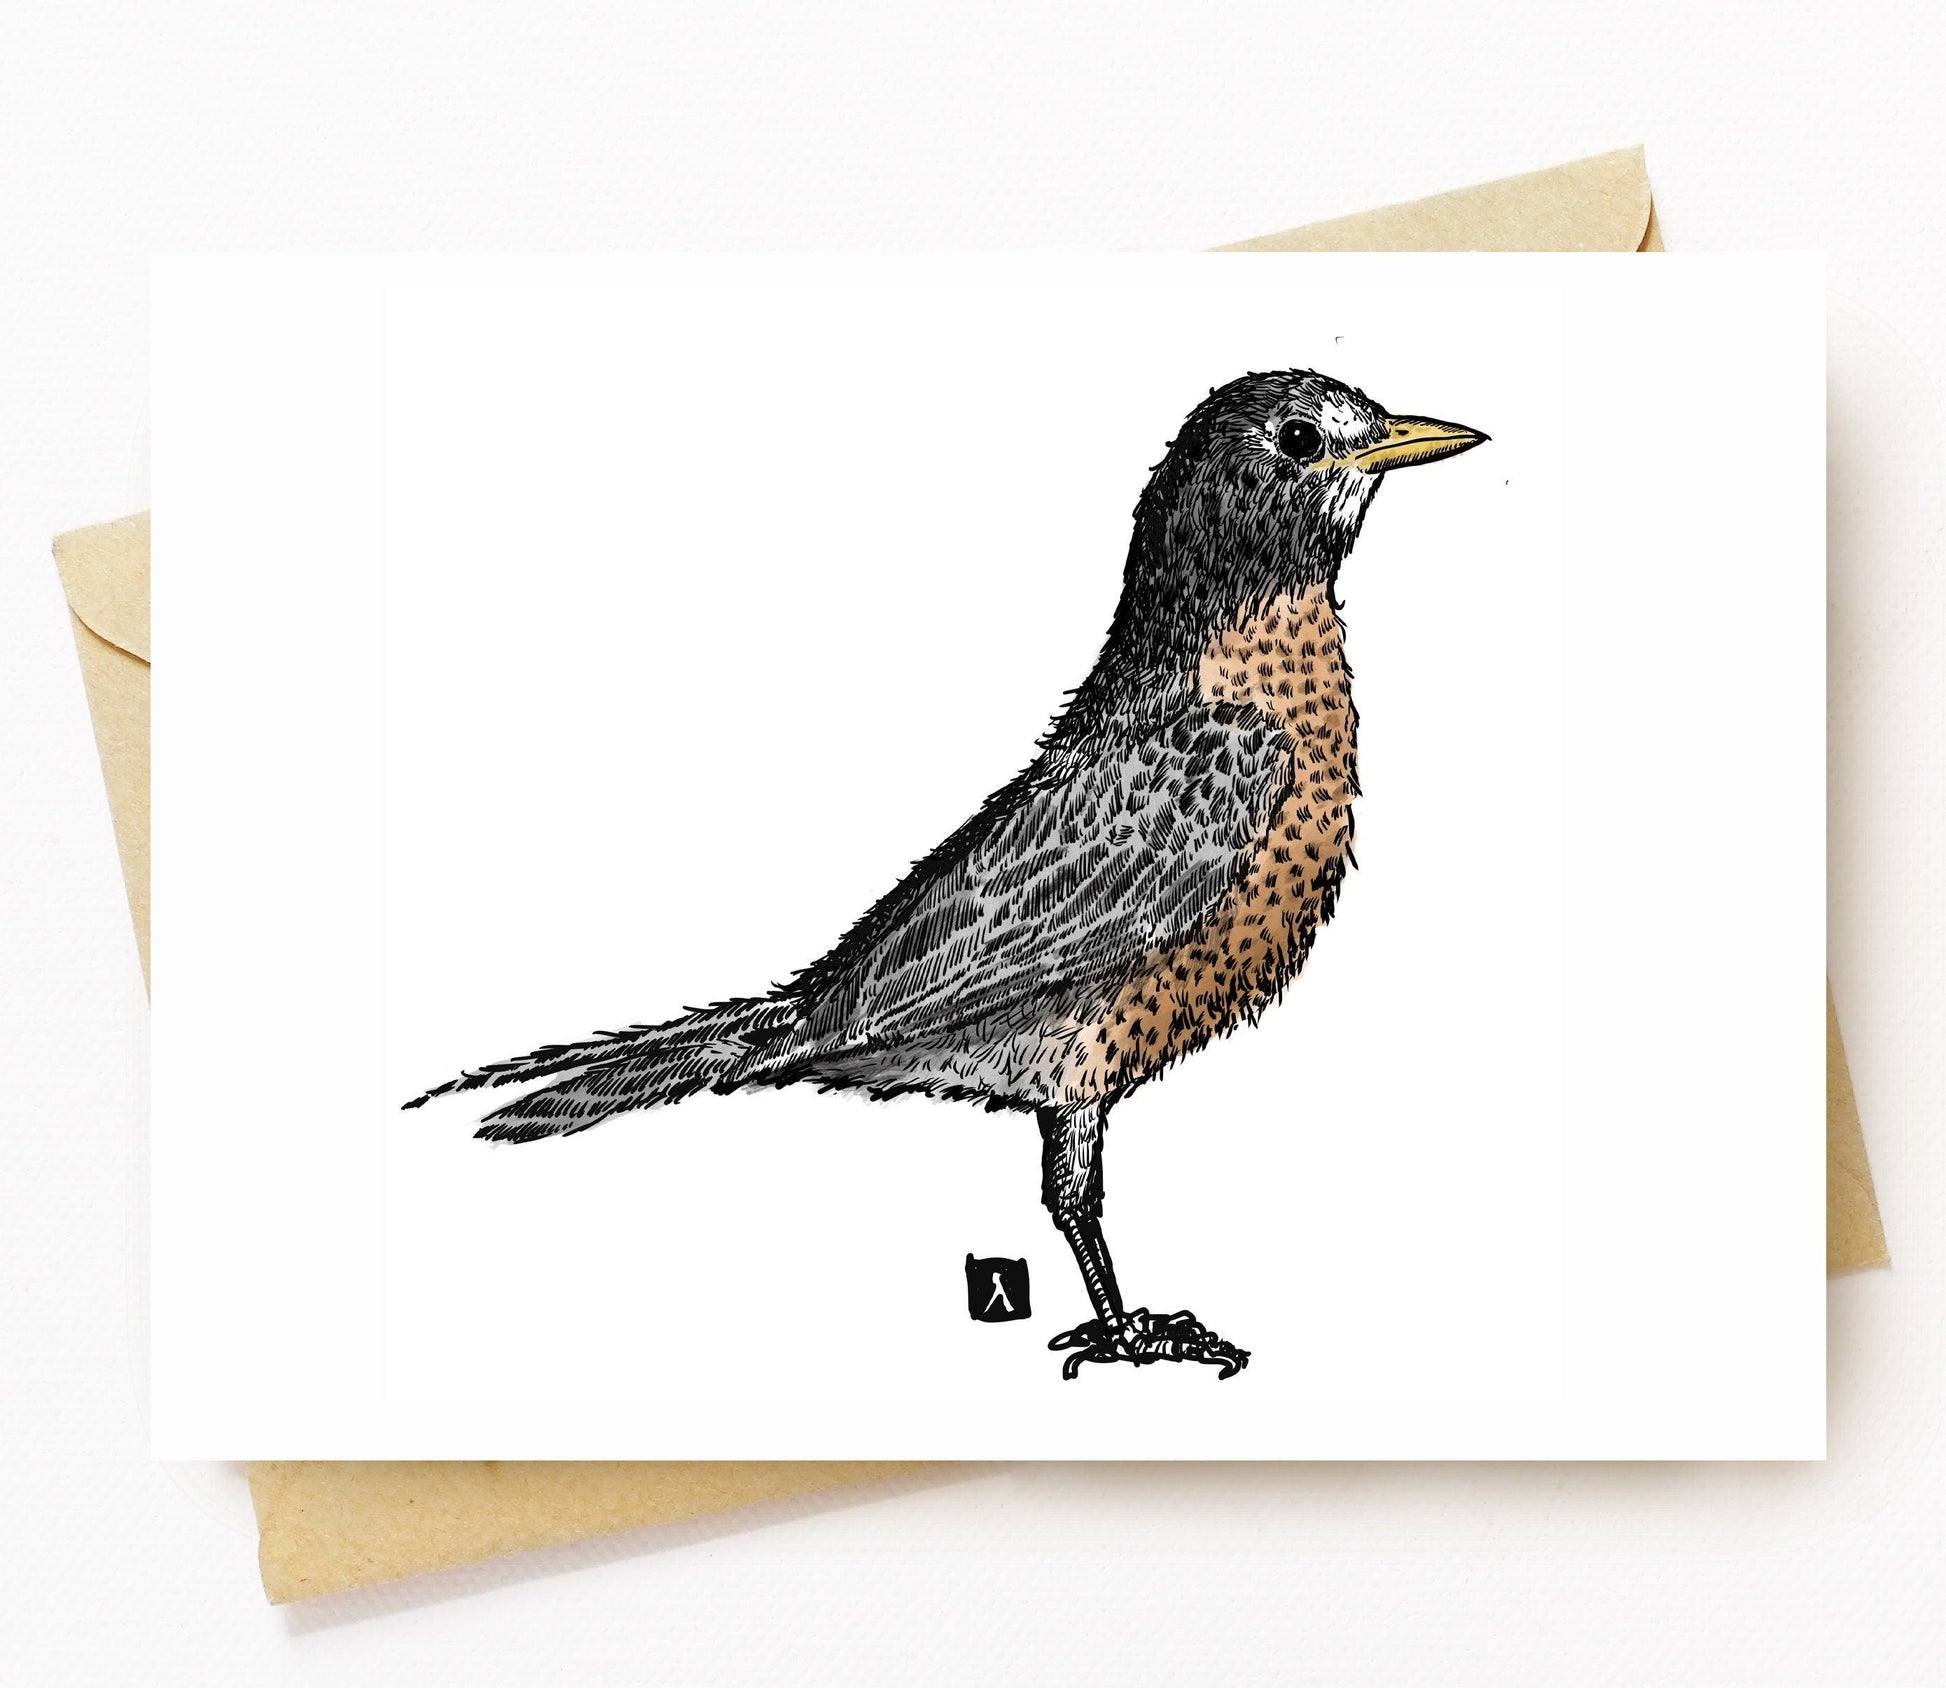 BellavanceInk: Greeting Card With An American Robin Pen & Ink Watercolor Illustration 5 x 7 Inches - BellavanceInk